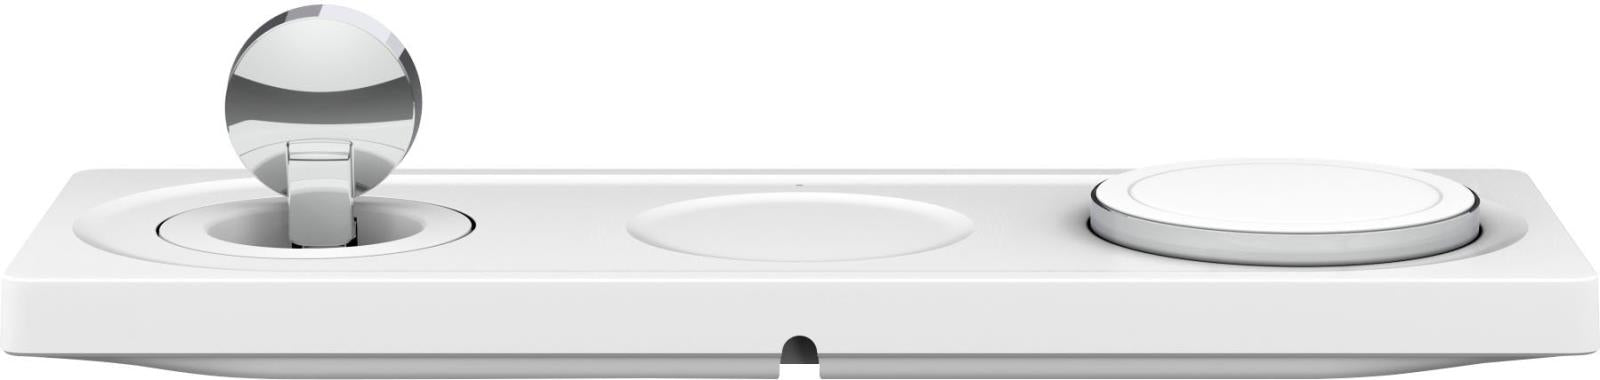 Belkin BoostCharge PRO 3-in-1 Wireless Charging Pad with MagSafe - White